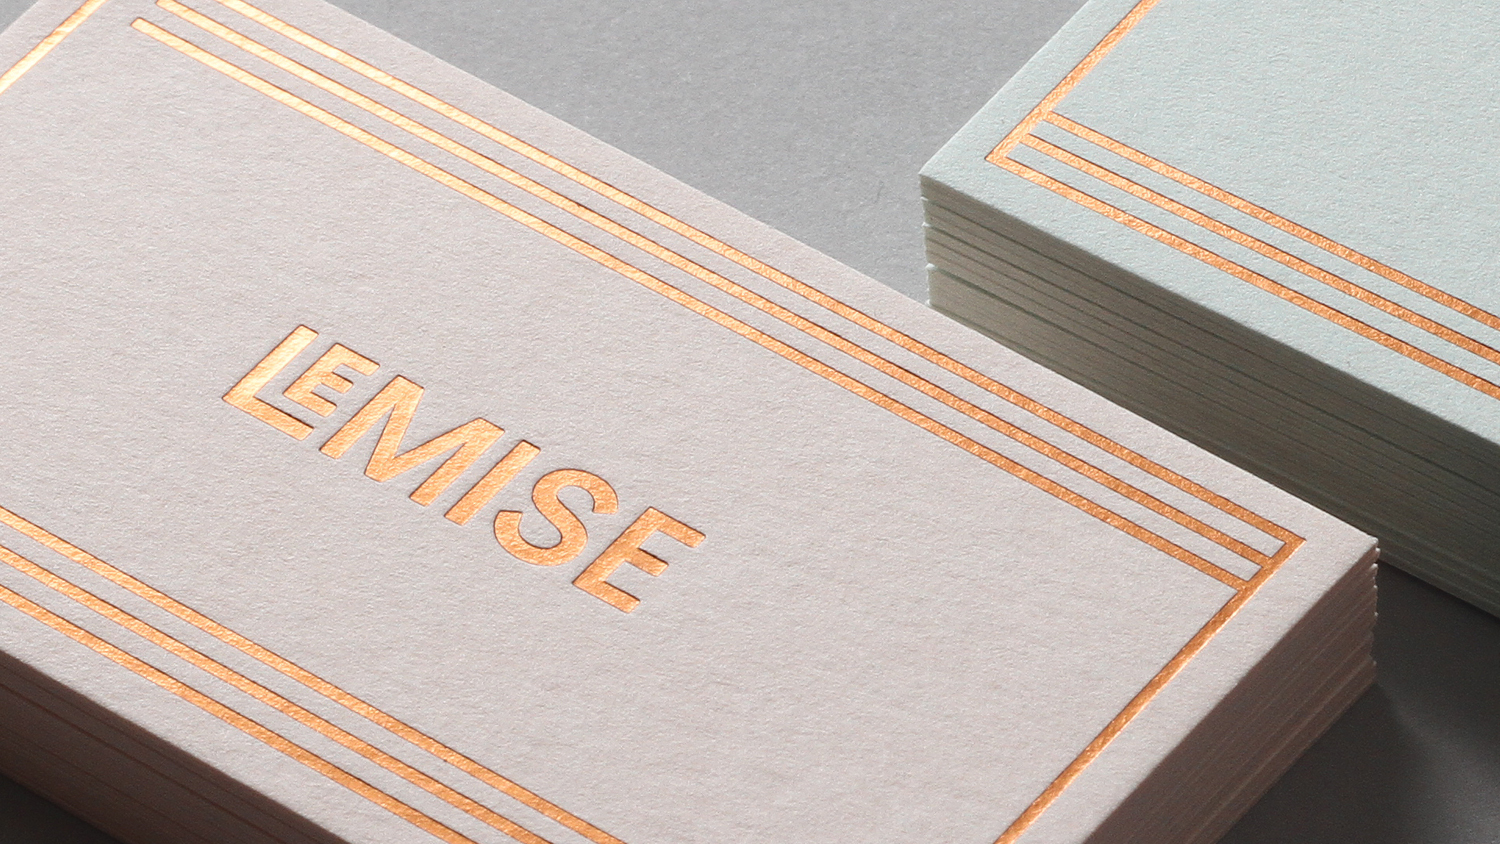 Brand identity and pastel coloured paper and coper block foil business cards for Brooklyn based art and design advisory business LeMise by DIA